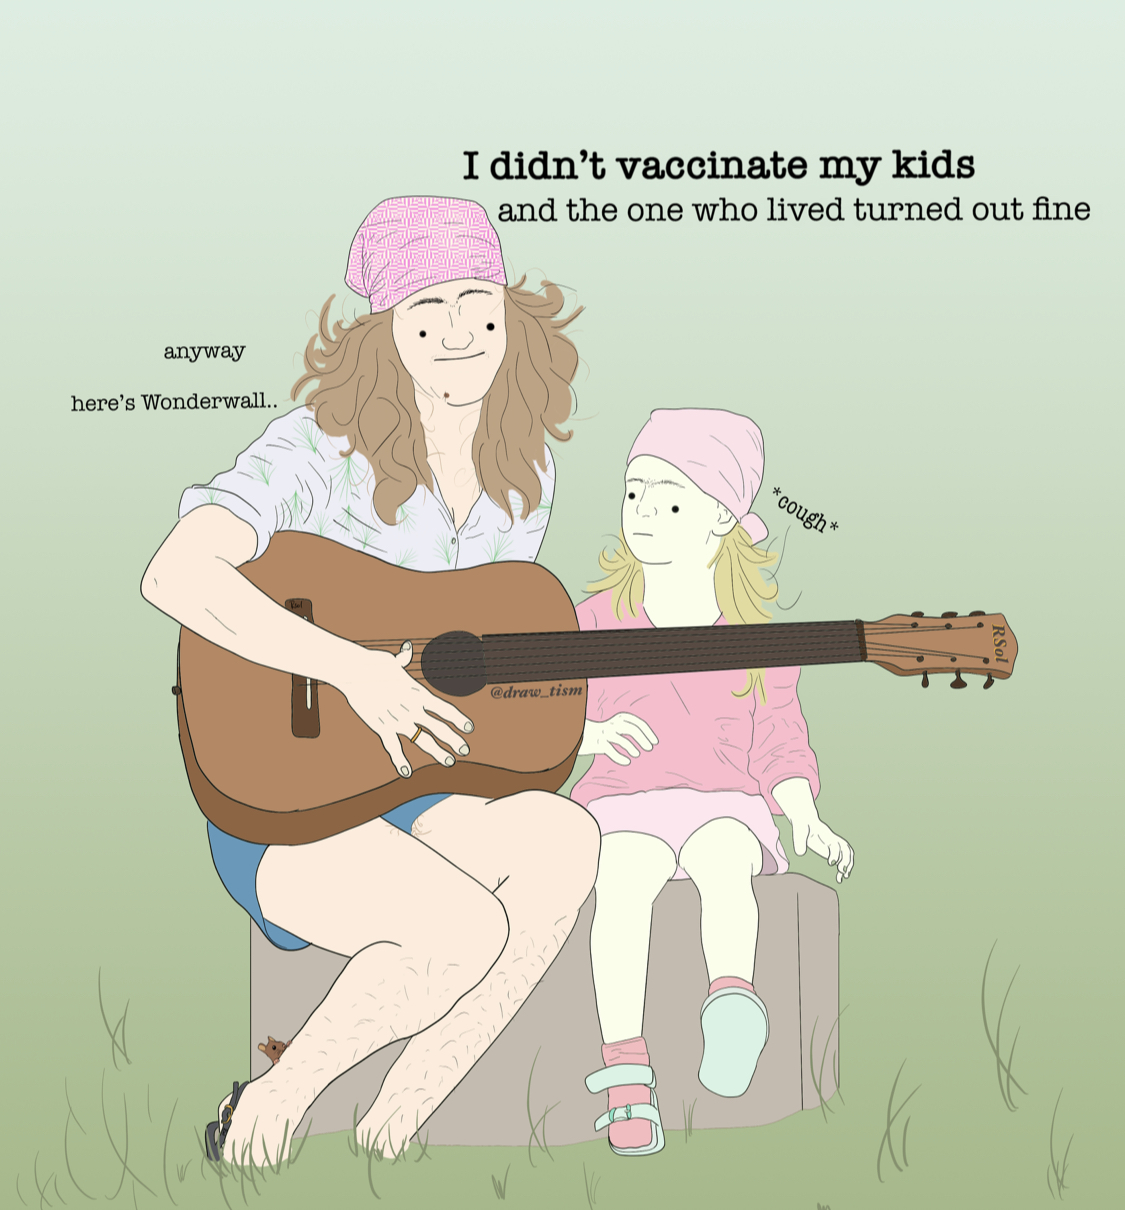 cartoon - I didn't vaccinate my kids and the one who lived turned out fine anyway here's Wonderwall